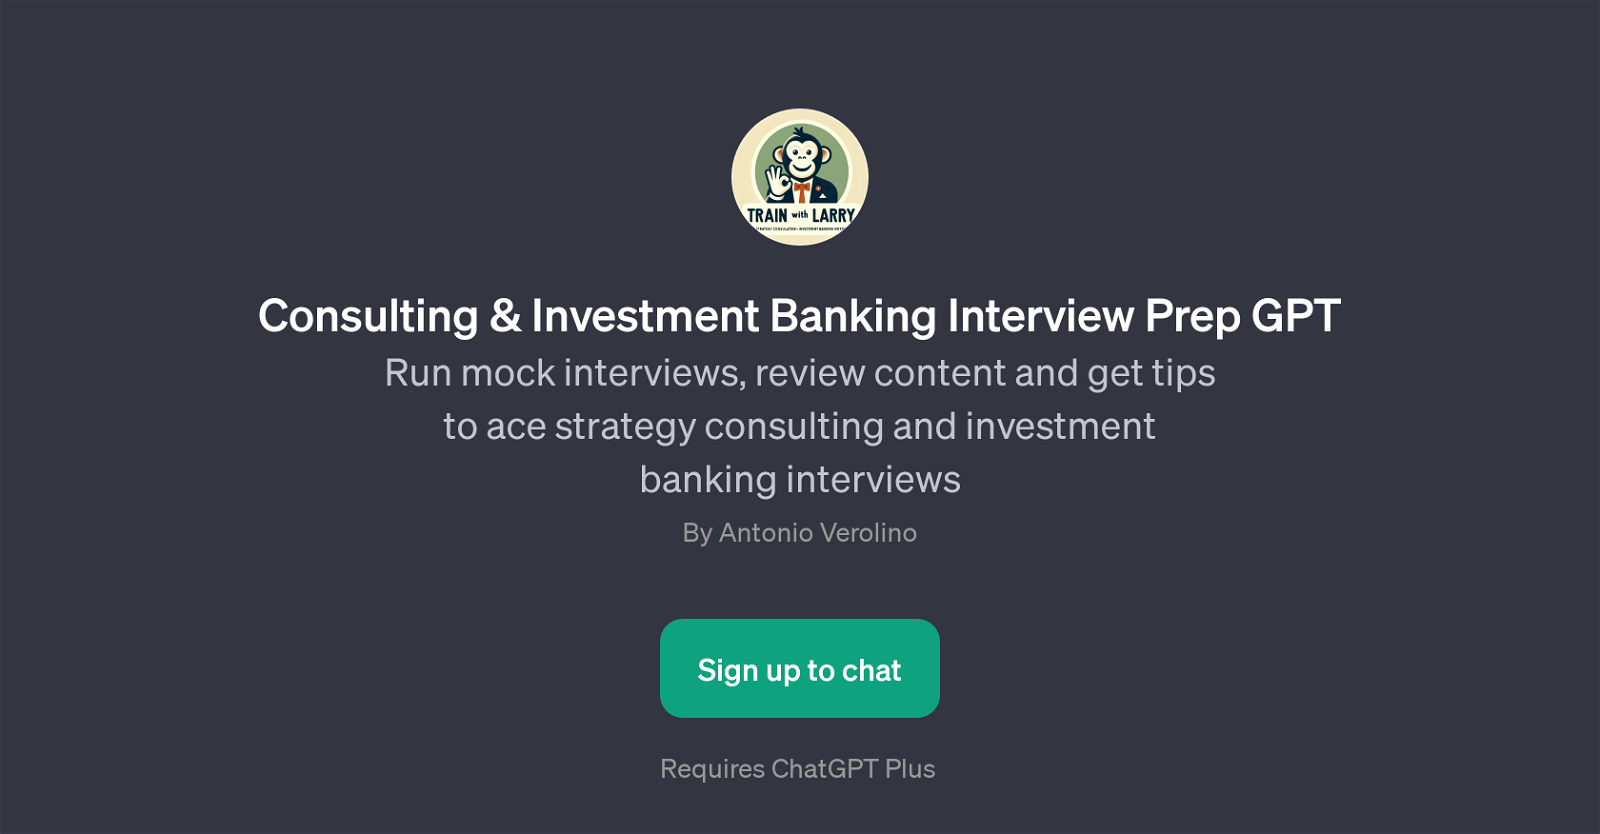 Consulting & Investment Banking Interview Prep GPT website